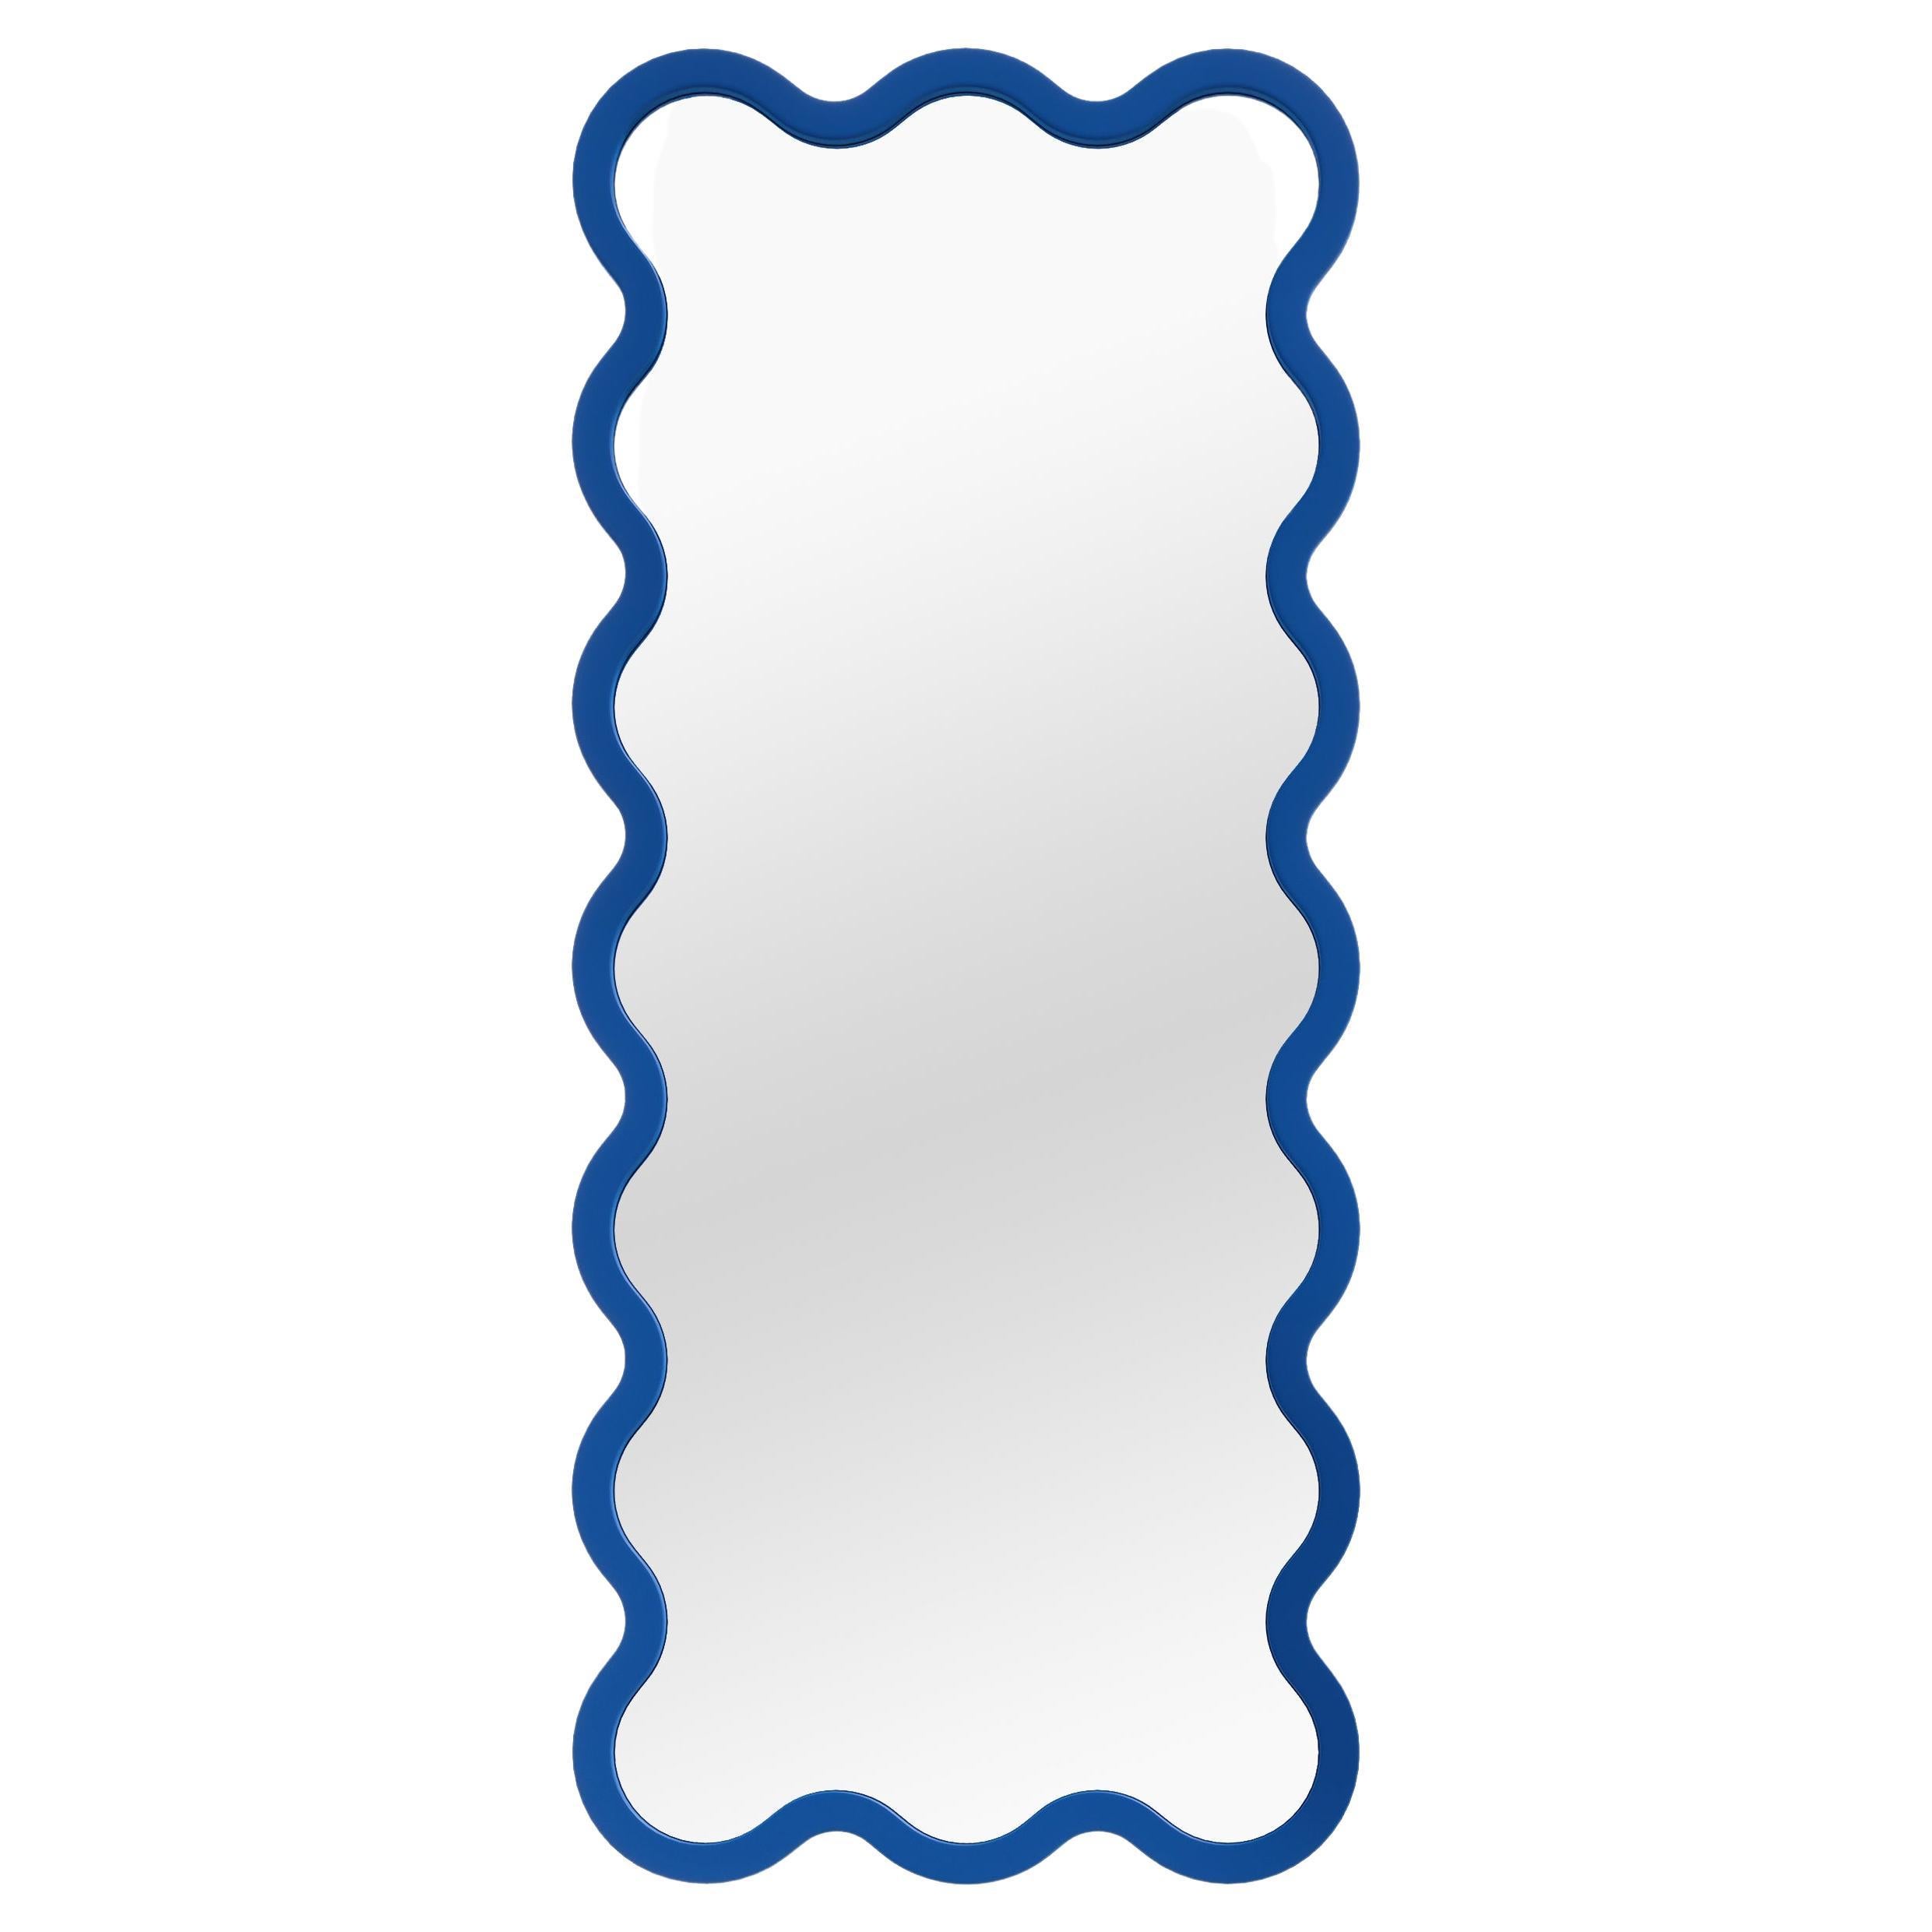 Contemporary Mirror 'Hvyli 16' by Oitoproducts, Blue Frame For Sale